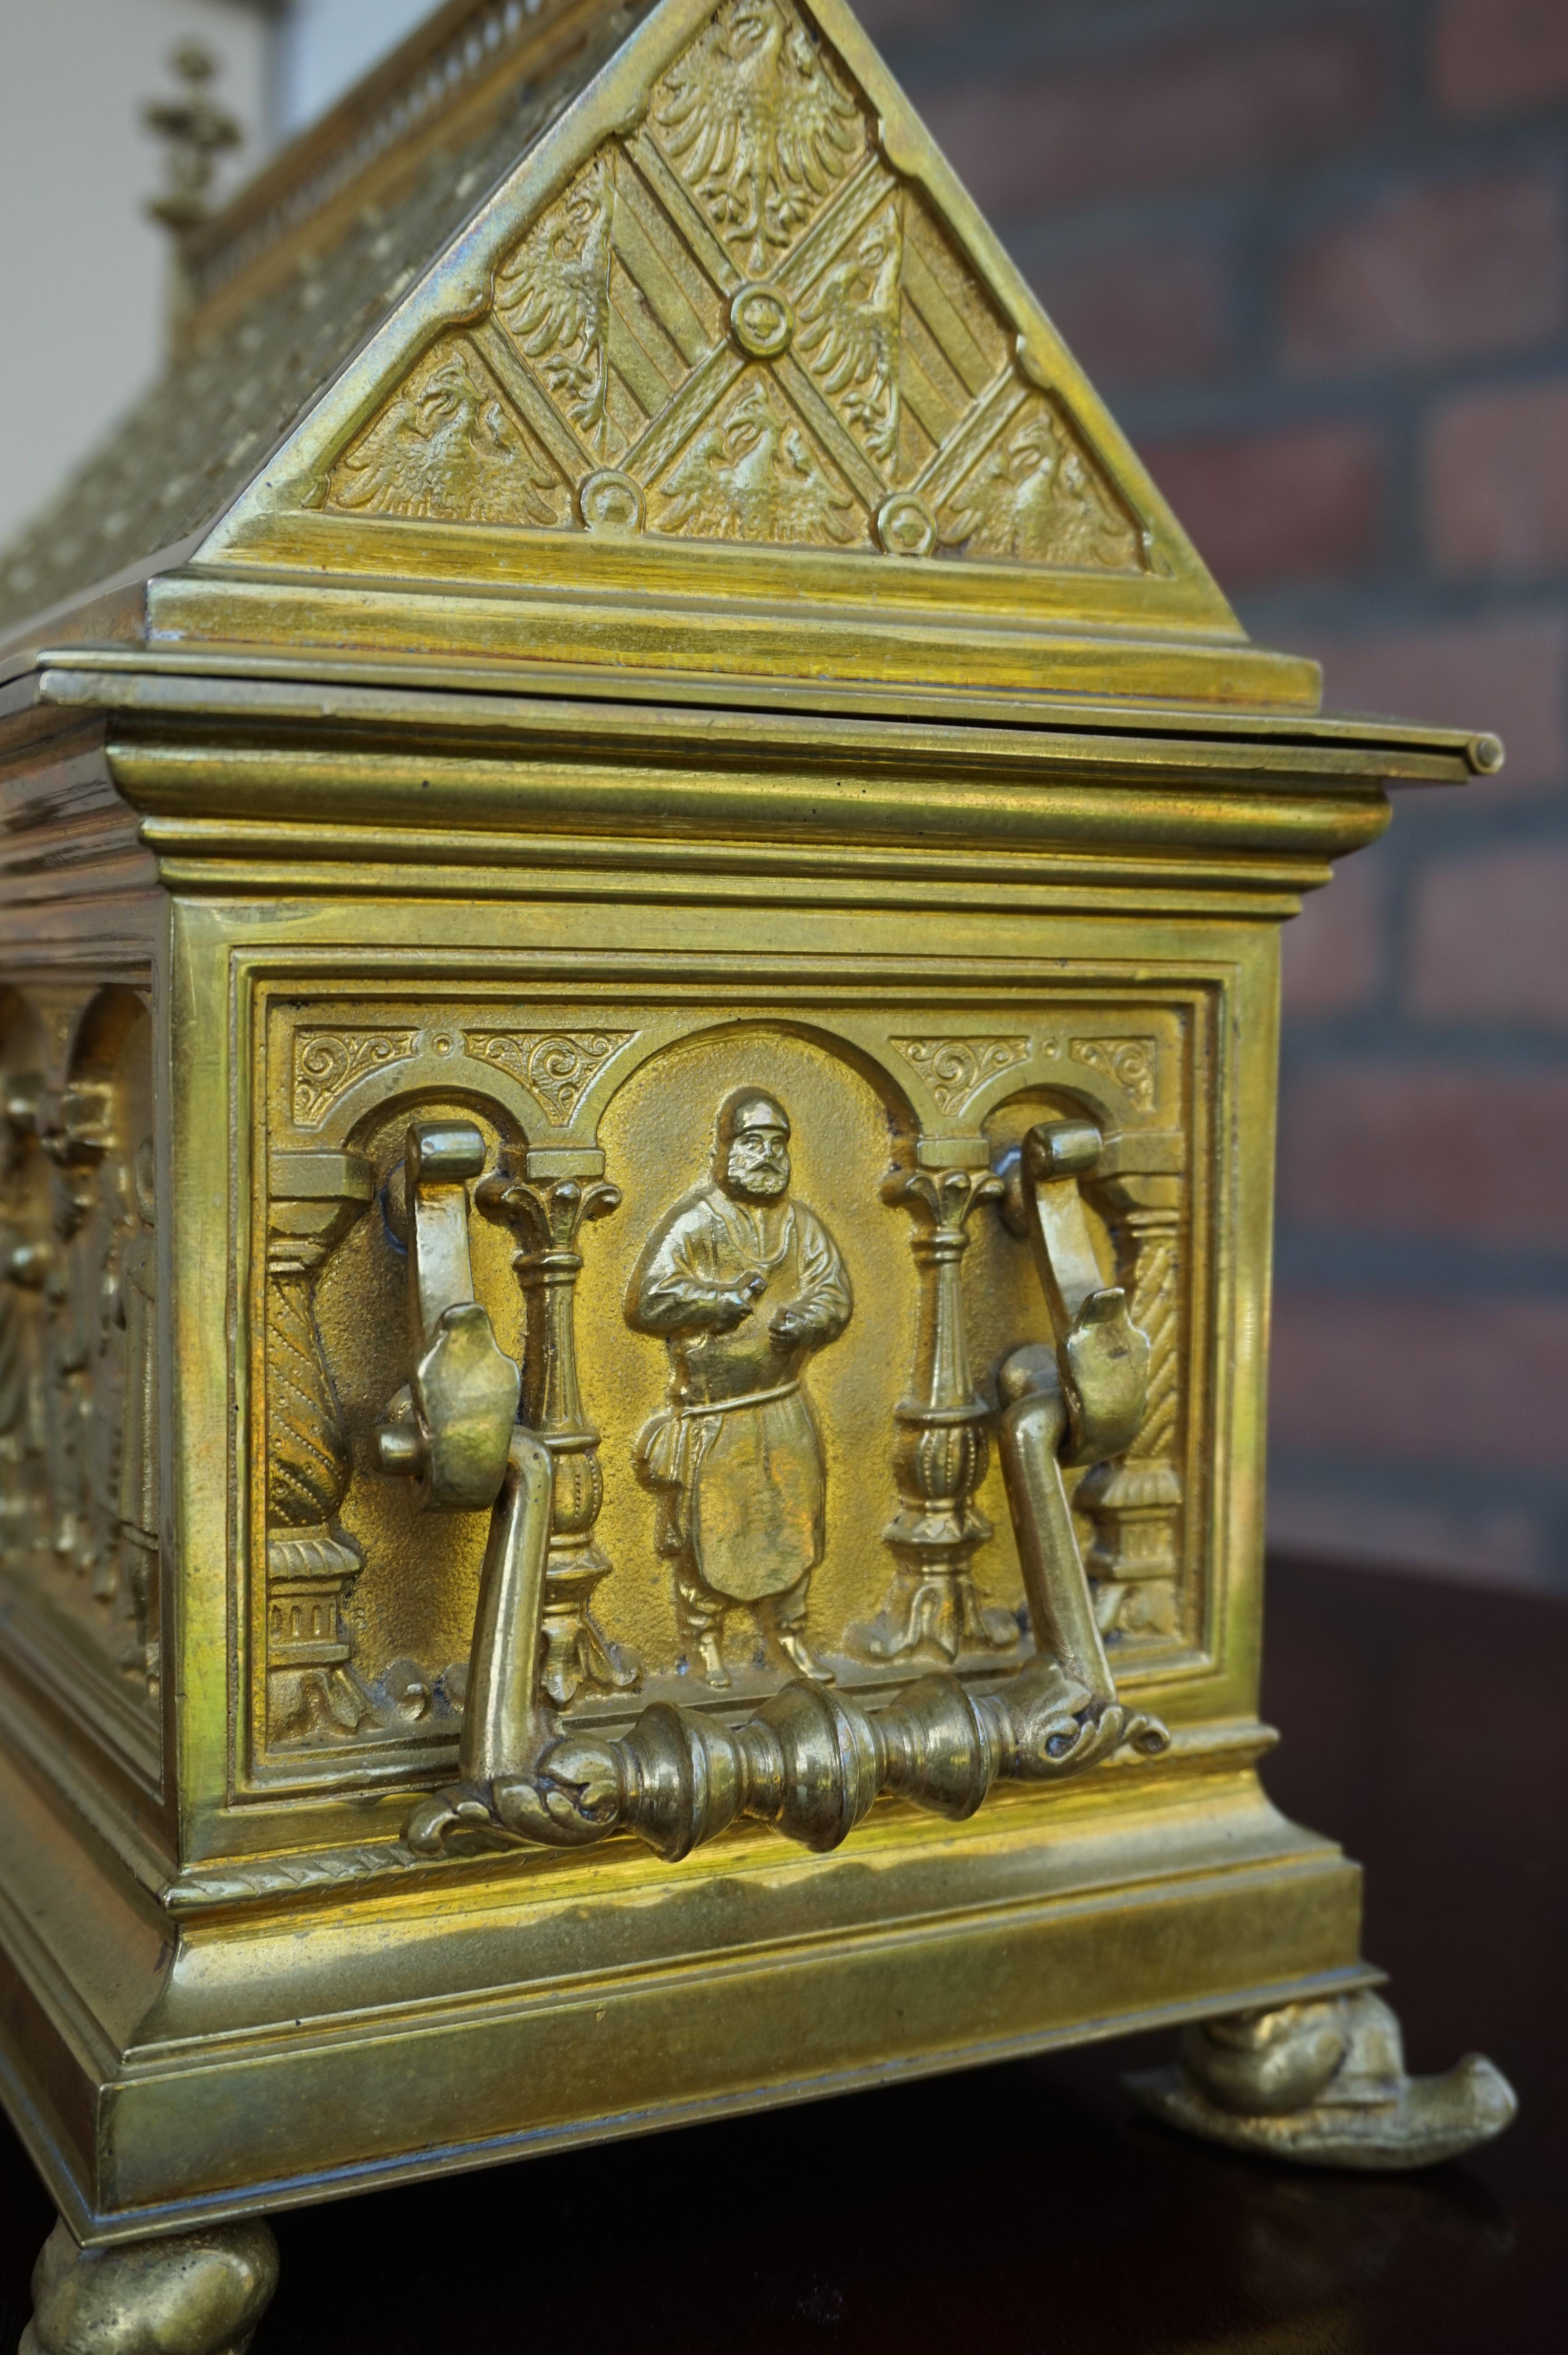 Hand-Crafted Antique & Stylish Gothic Revival Gilt Bronze & Brass Church Relic or Jewelry Box